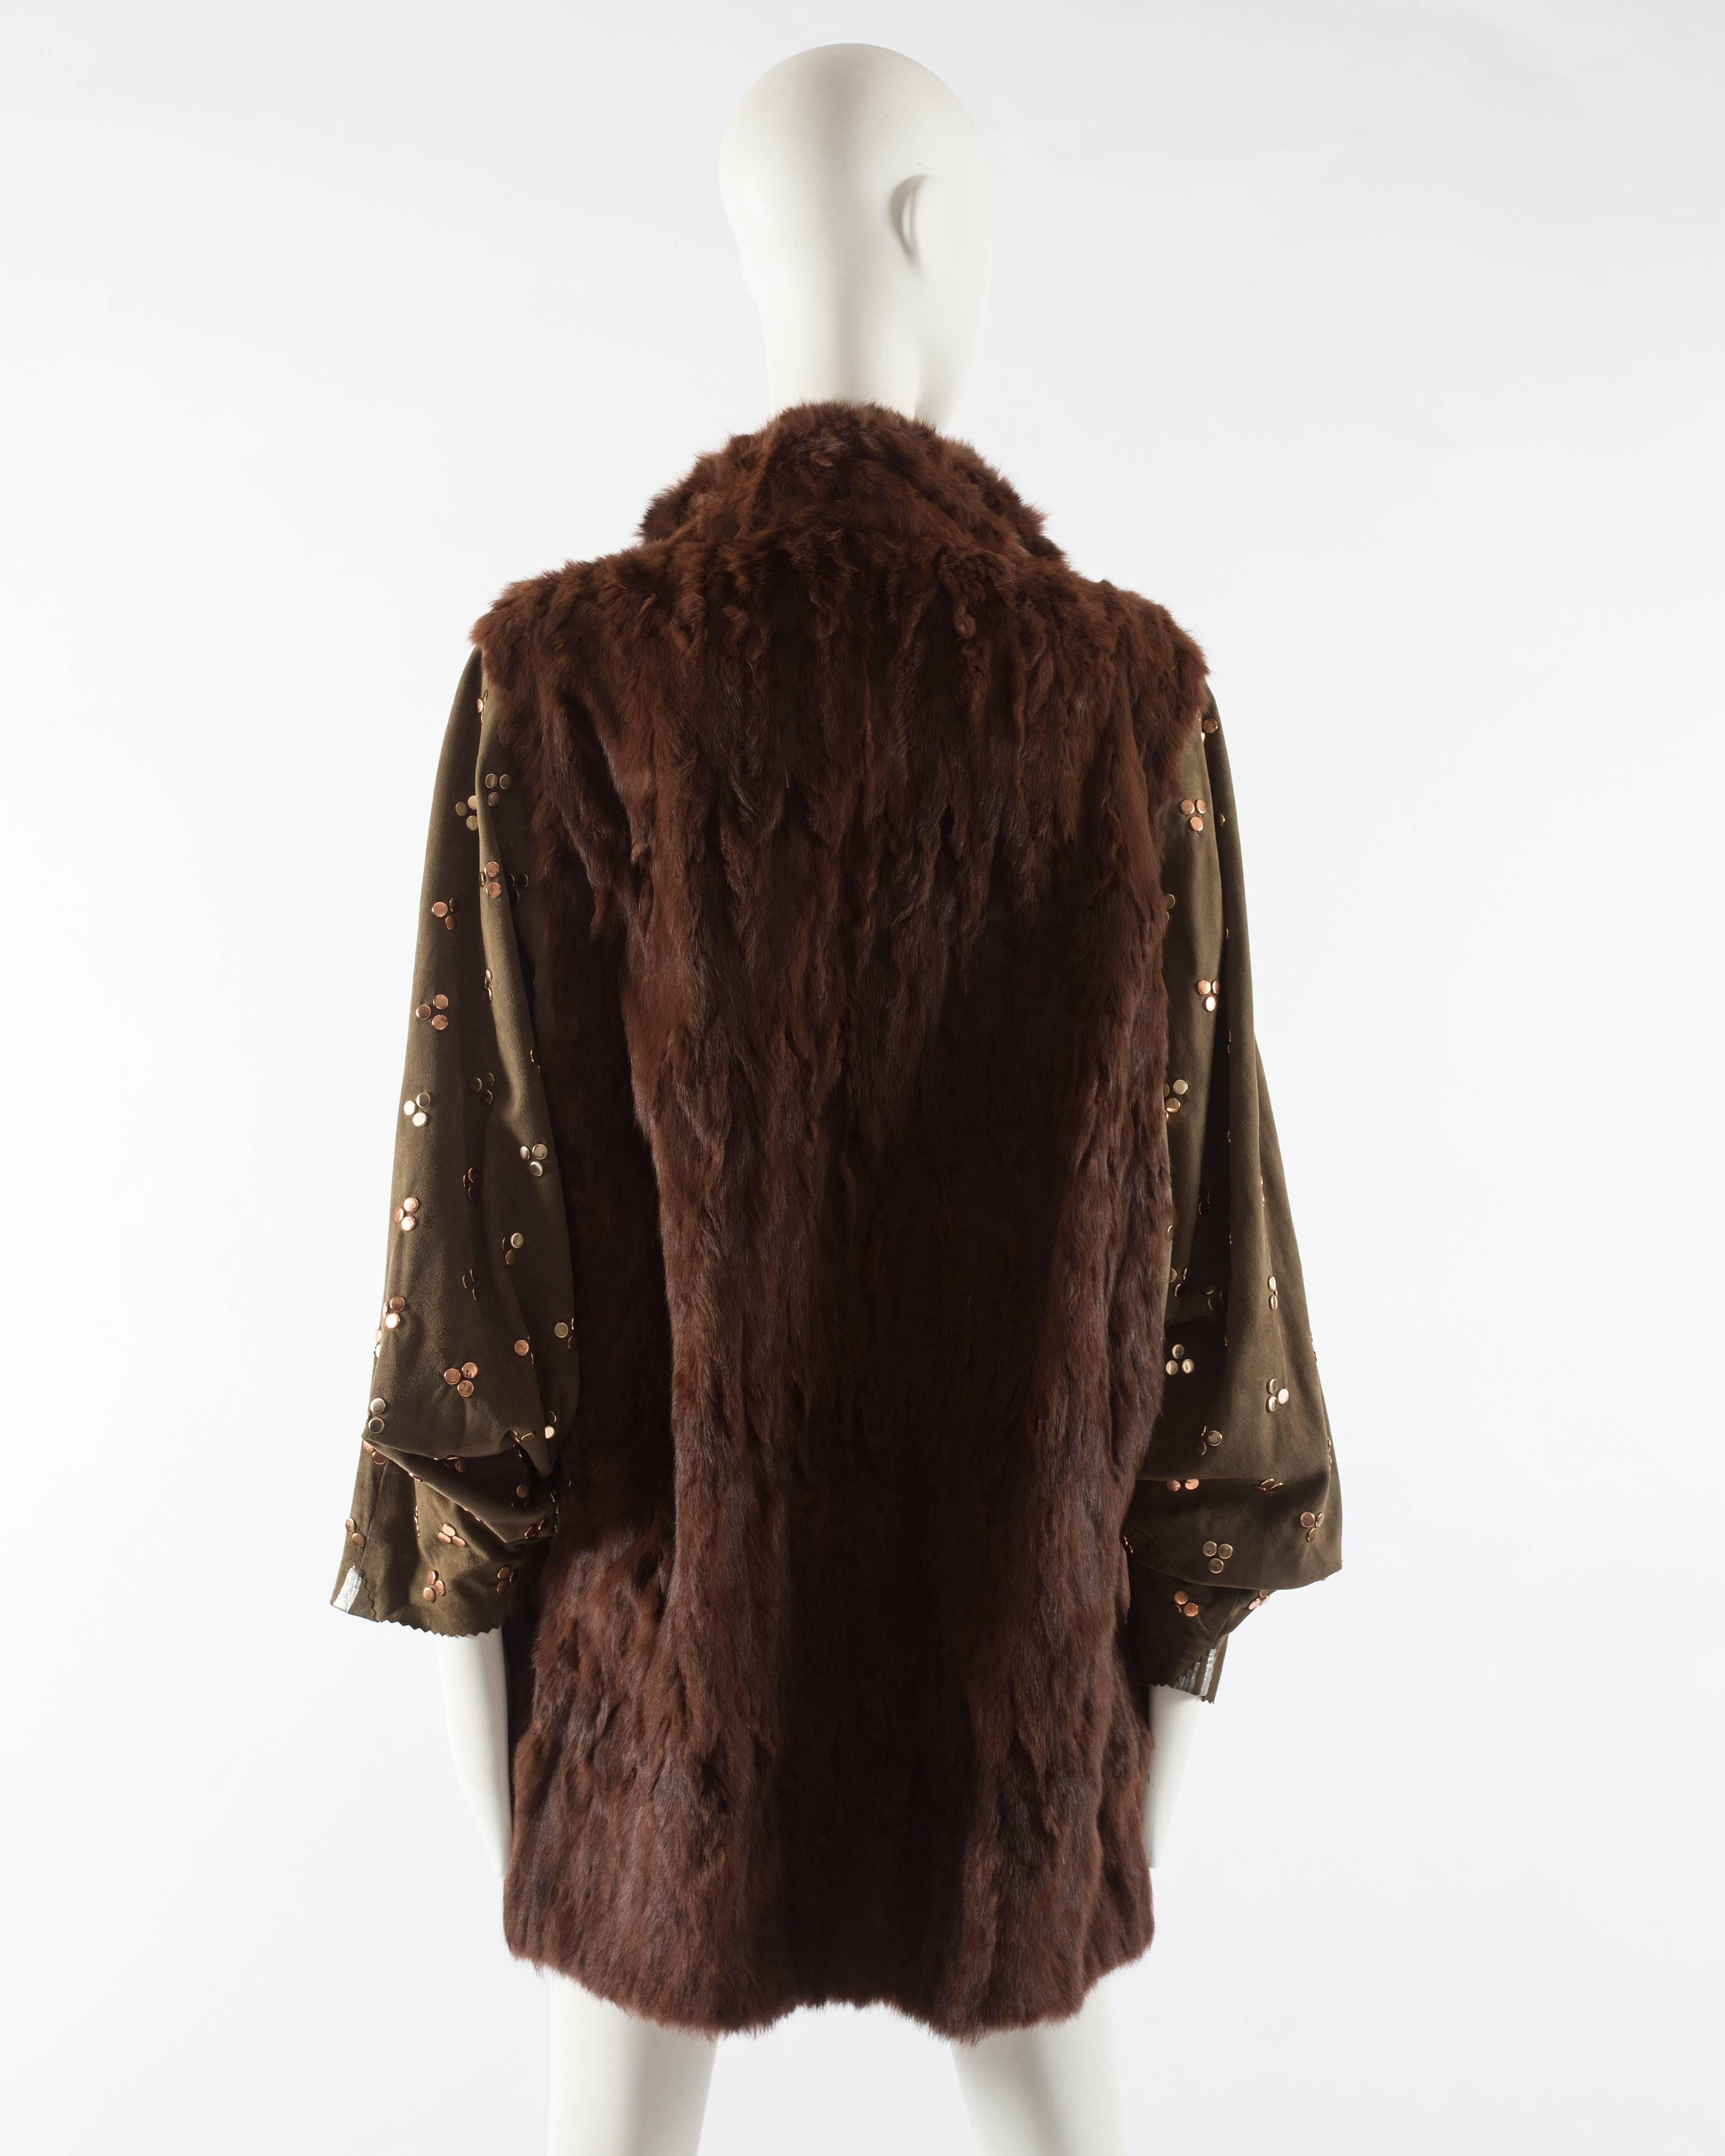 Black Chloe mink fur coat with studded suede batwing sleeves, circa 1980s